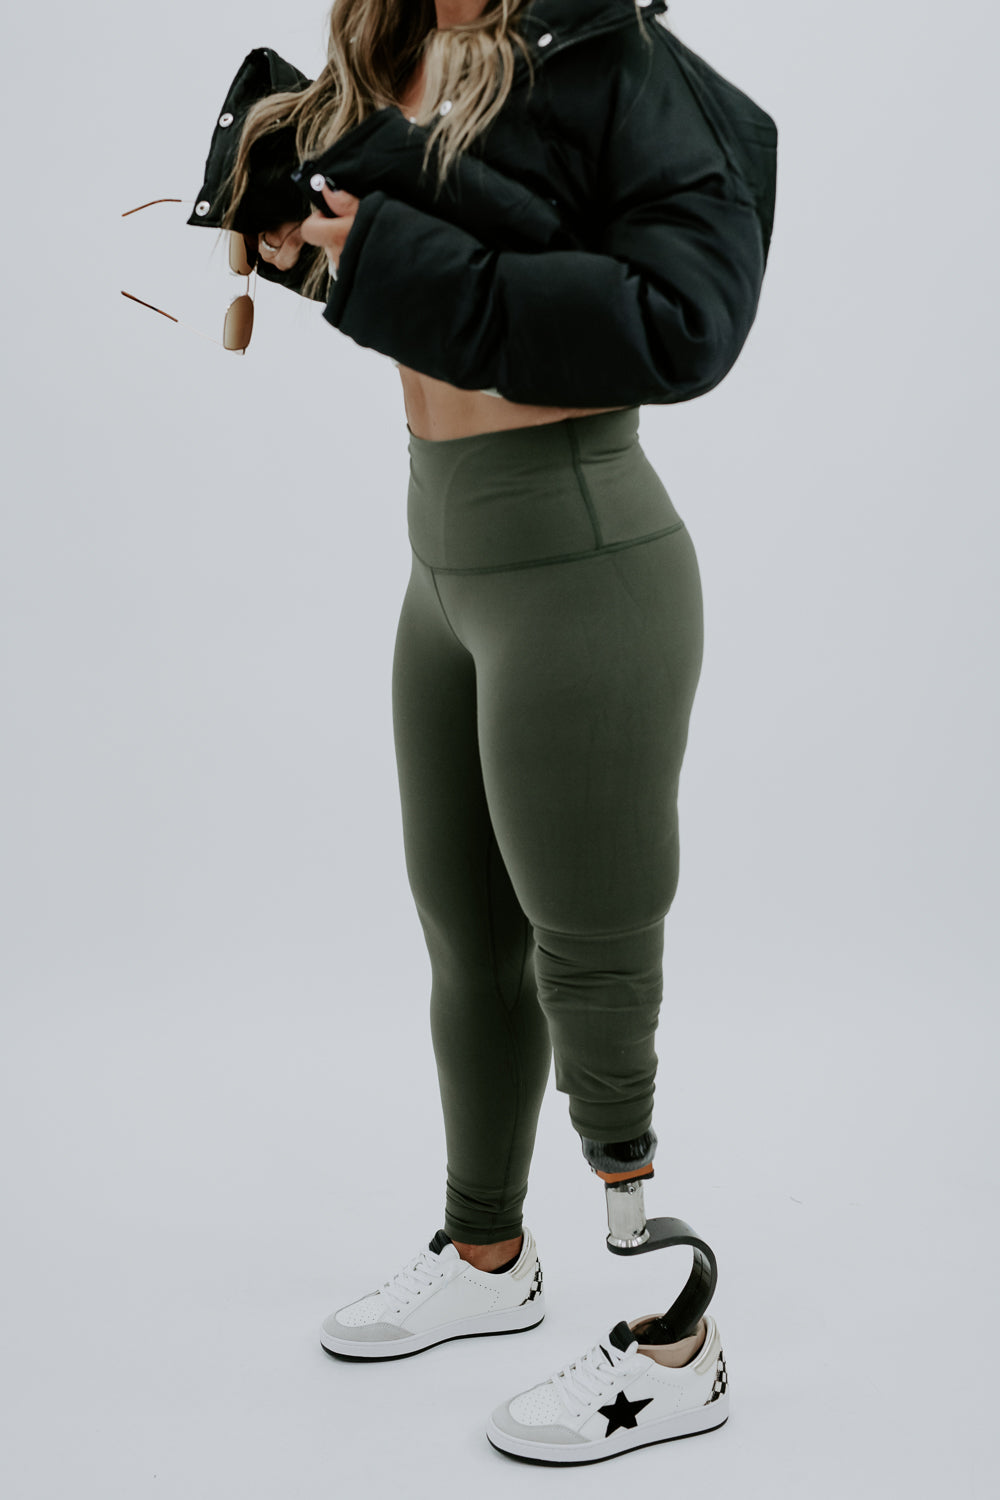 Army Green Buttery Soft Leggings With Side Pockets – Hometown Honey Boutique